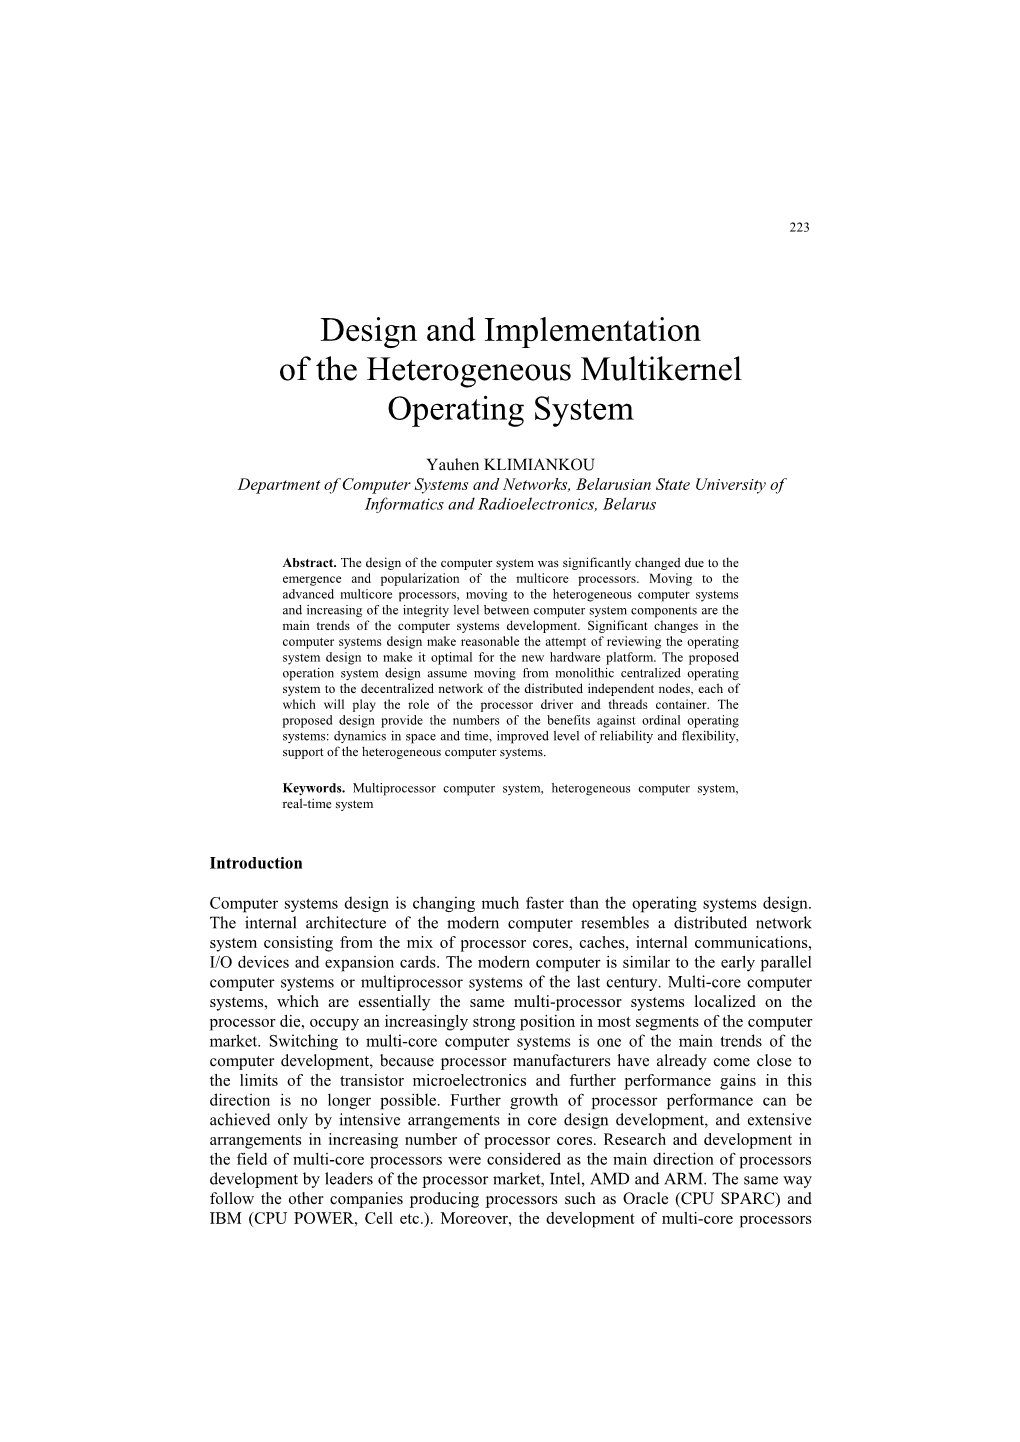 Design and Implementation of the Heterogeneous Multikernel Operating System